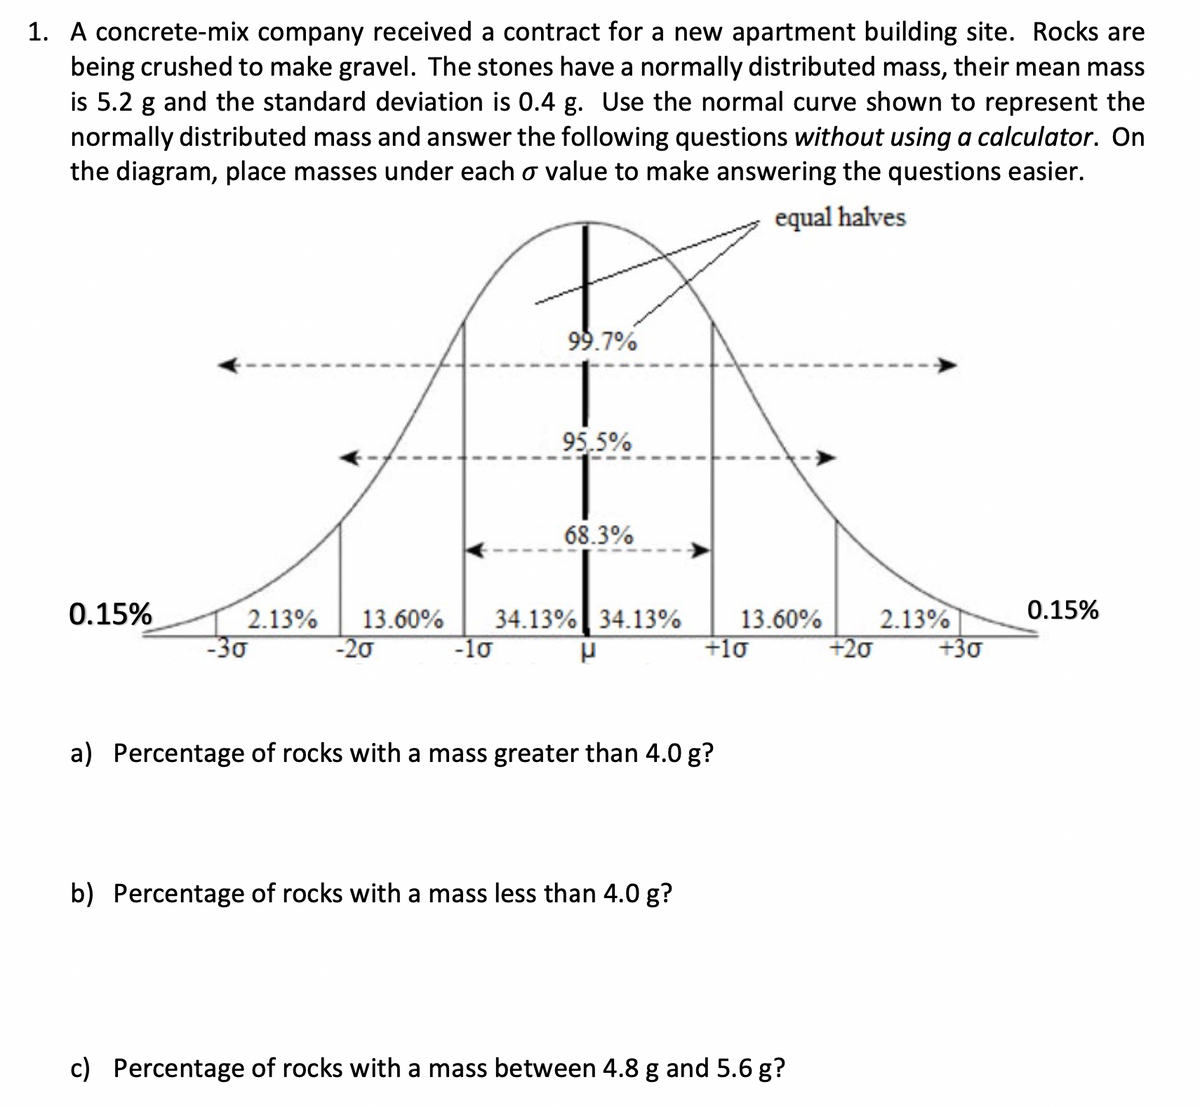 1. A concrete-mix company received a contract for a new apartment building site. Rocks are
being crushed to make gravel. The stones have a normally distributed mass, their mean mass
is 5.2 g and the standard deviation is 0.4 g. Use the normal curve shown to represent the
normally distributed mass and answer the following questions without using a calculator. On
the diagram, place masses under each o value to make answering the questions easier.
equal halves
0.15%
2.13%
-30
-20
99.7%
-10
95.5%
13.60% 34.13% 34.13%
P
68.3%
a) Percentage of rocks with a mass greater than 4.0 g?
b) Percentage of rocks with a mass less than 4.0 g?
13.60%
+10
c) Percentage of rocks with a mass between 4.8 g and 5.6 g?
+20
2.13%
+30
0.15%